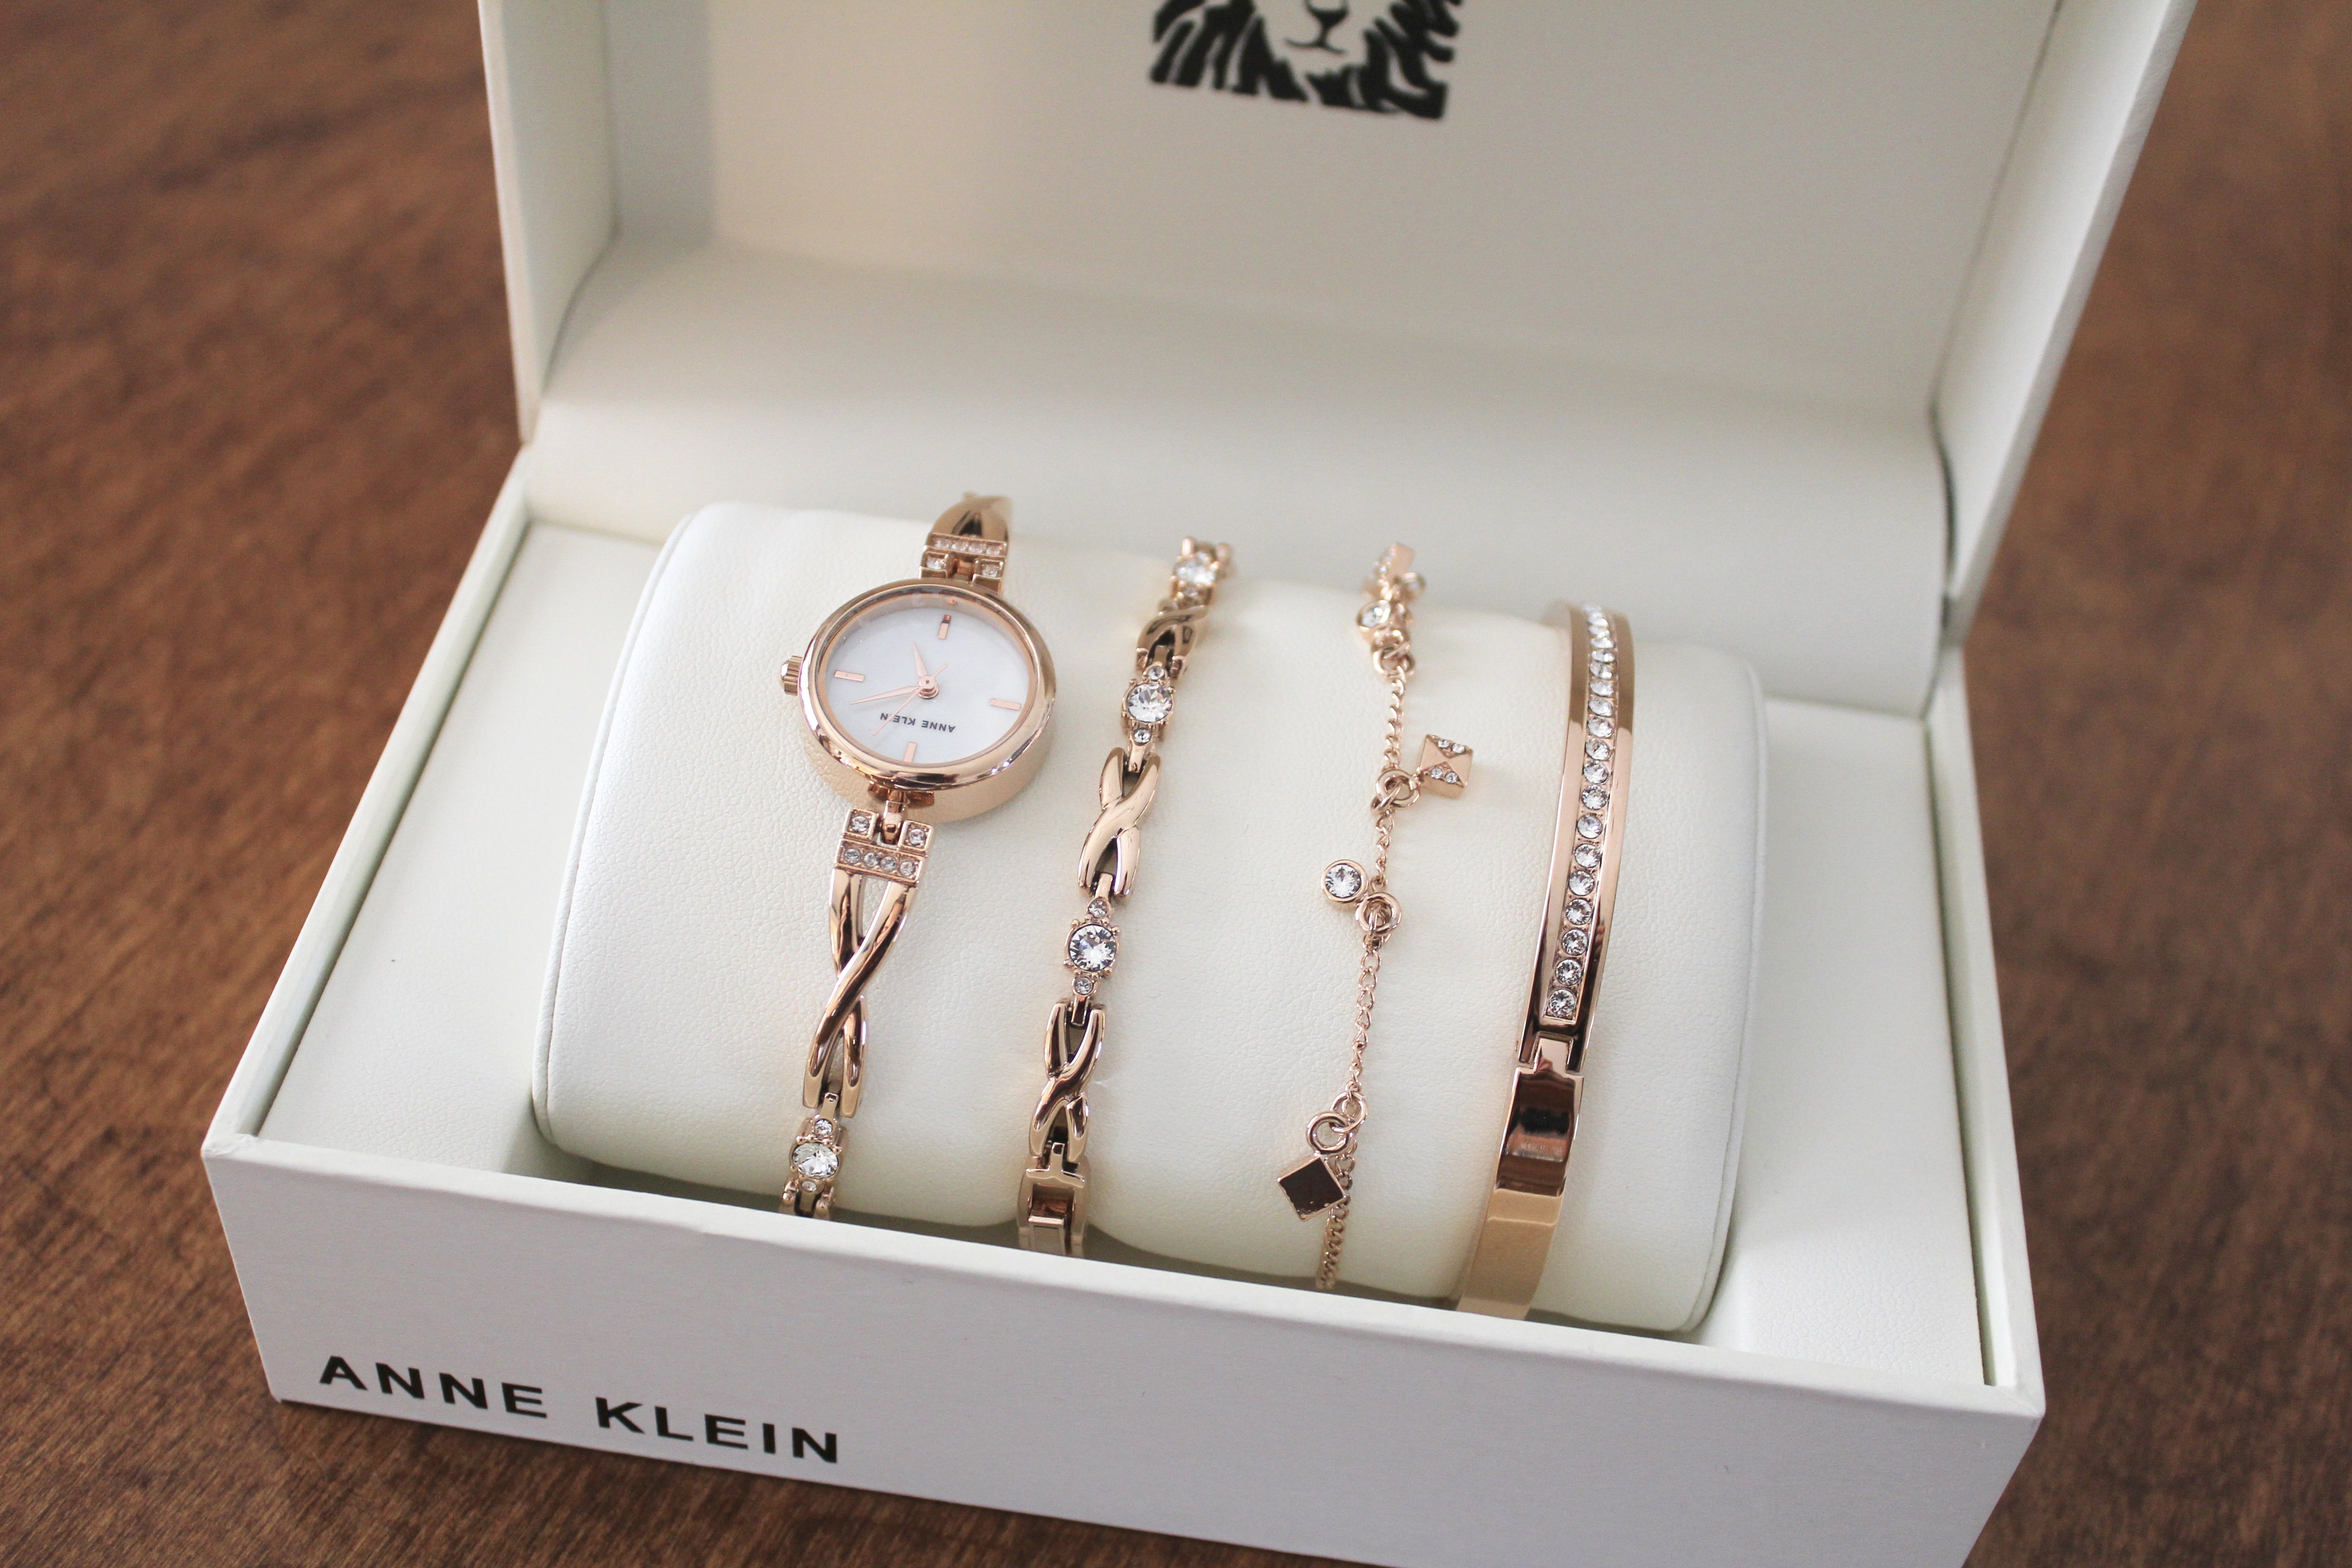 Styling a Statement Accessory for Spring | Anne Klein at Macy's